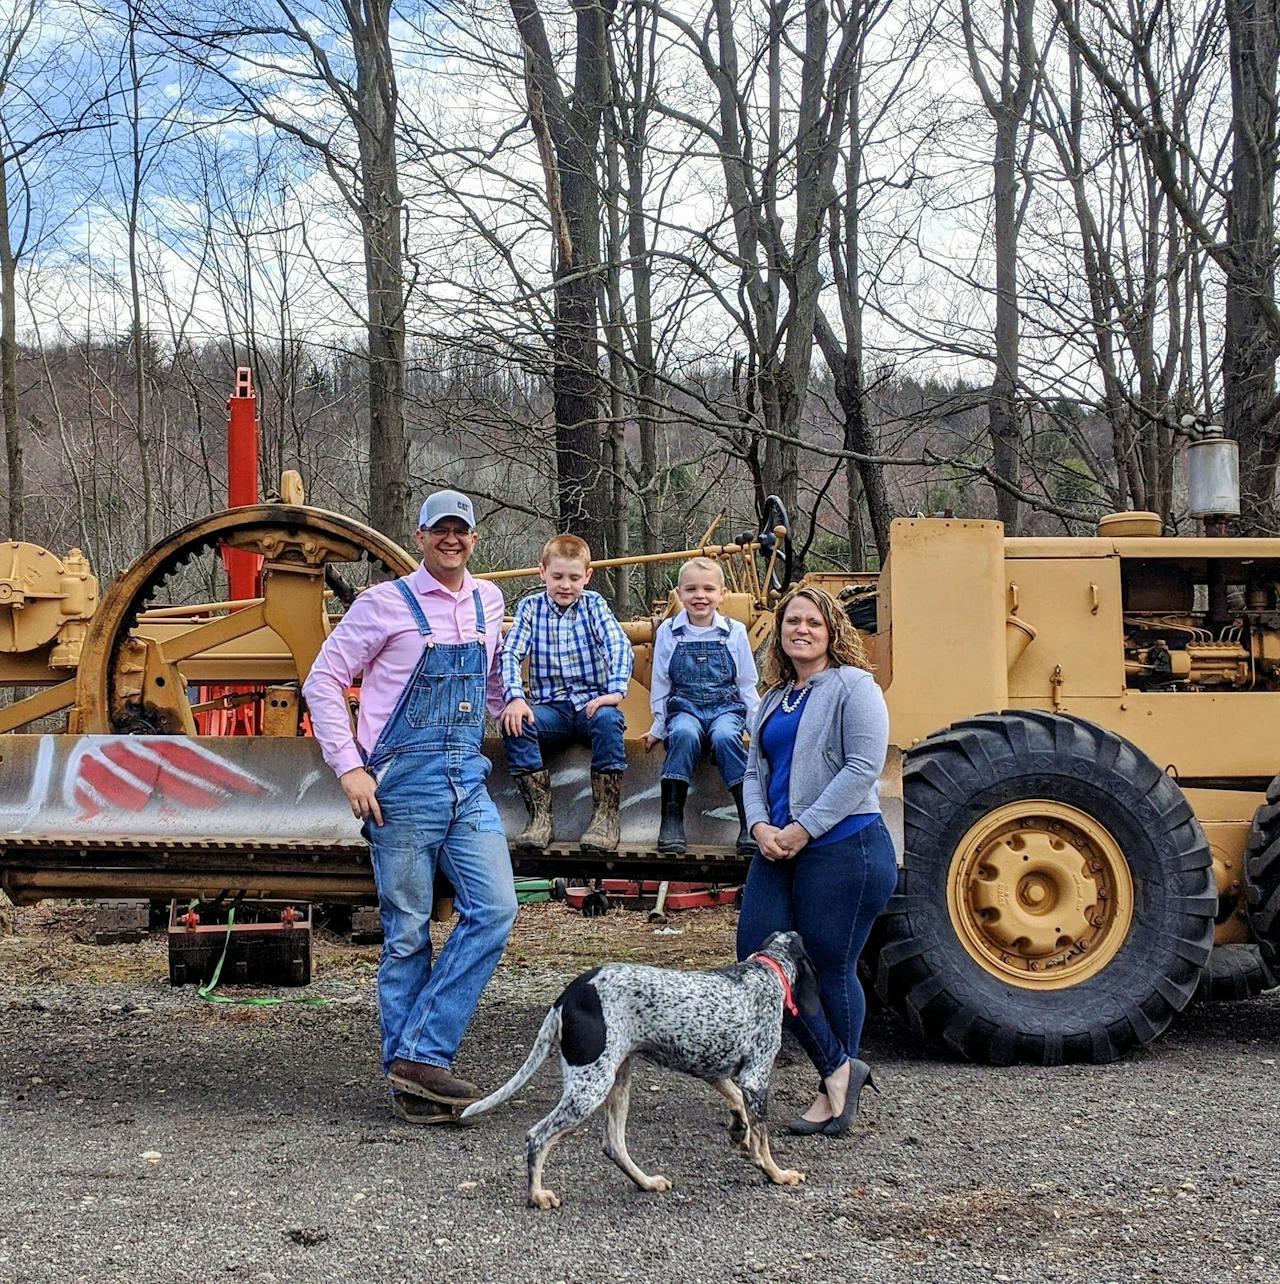 Garret Wilson and his family with an antique grader